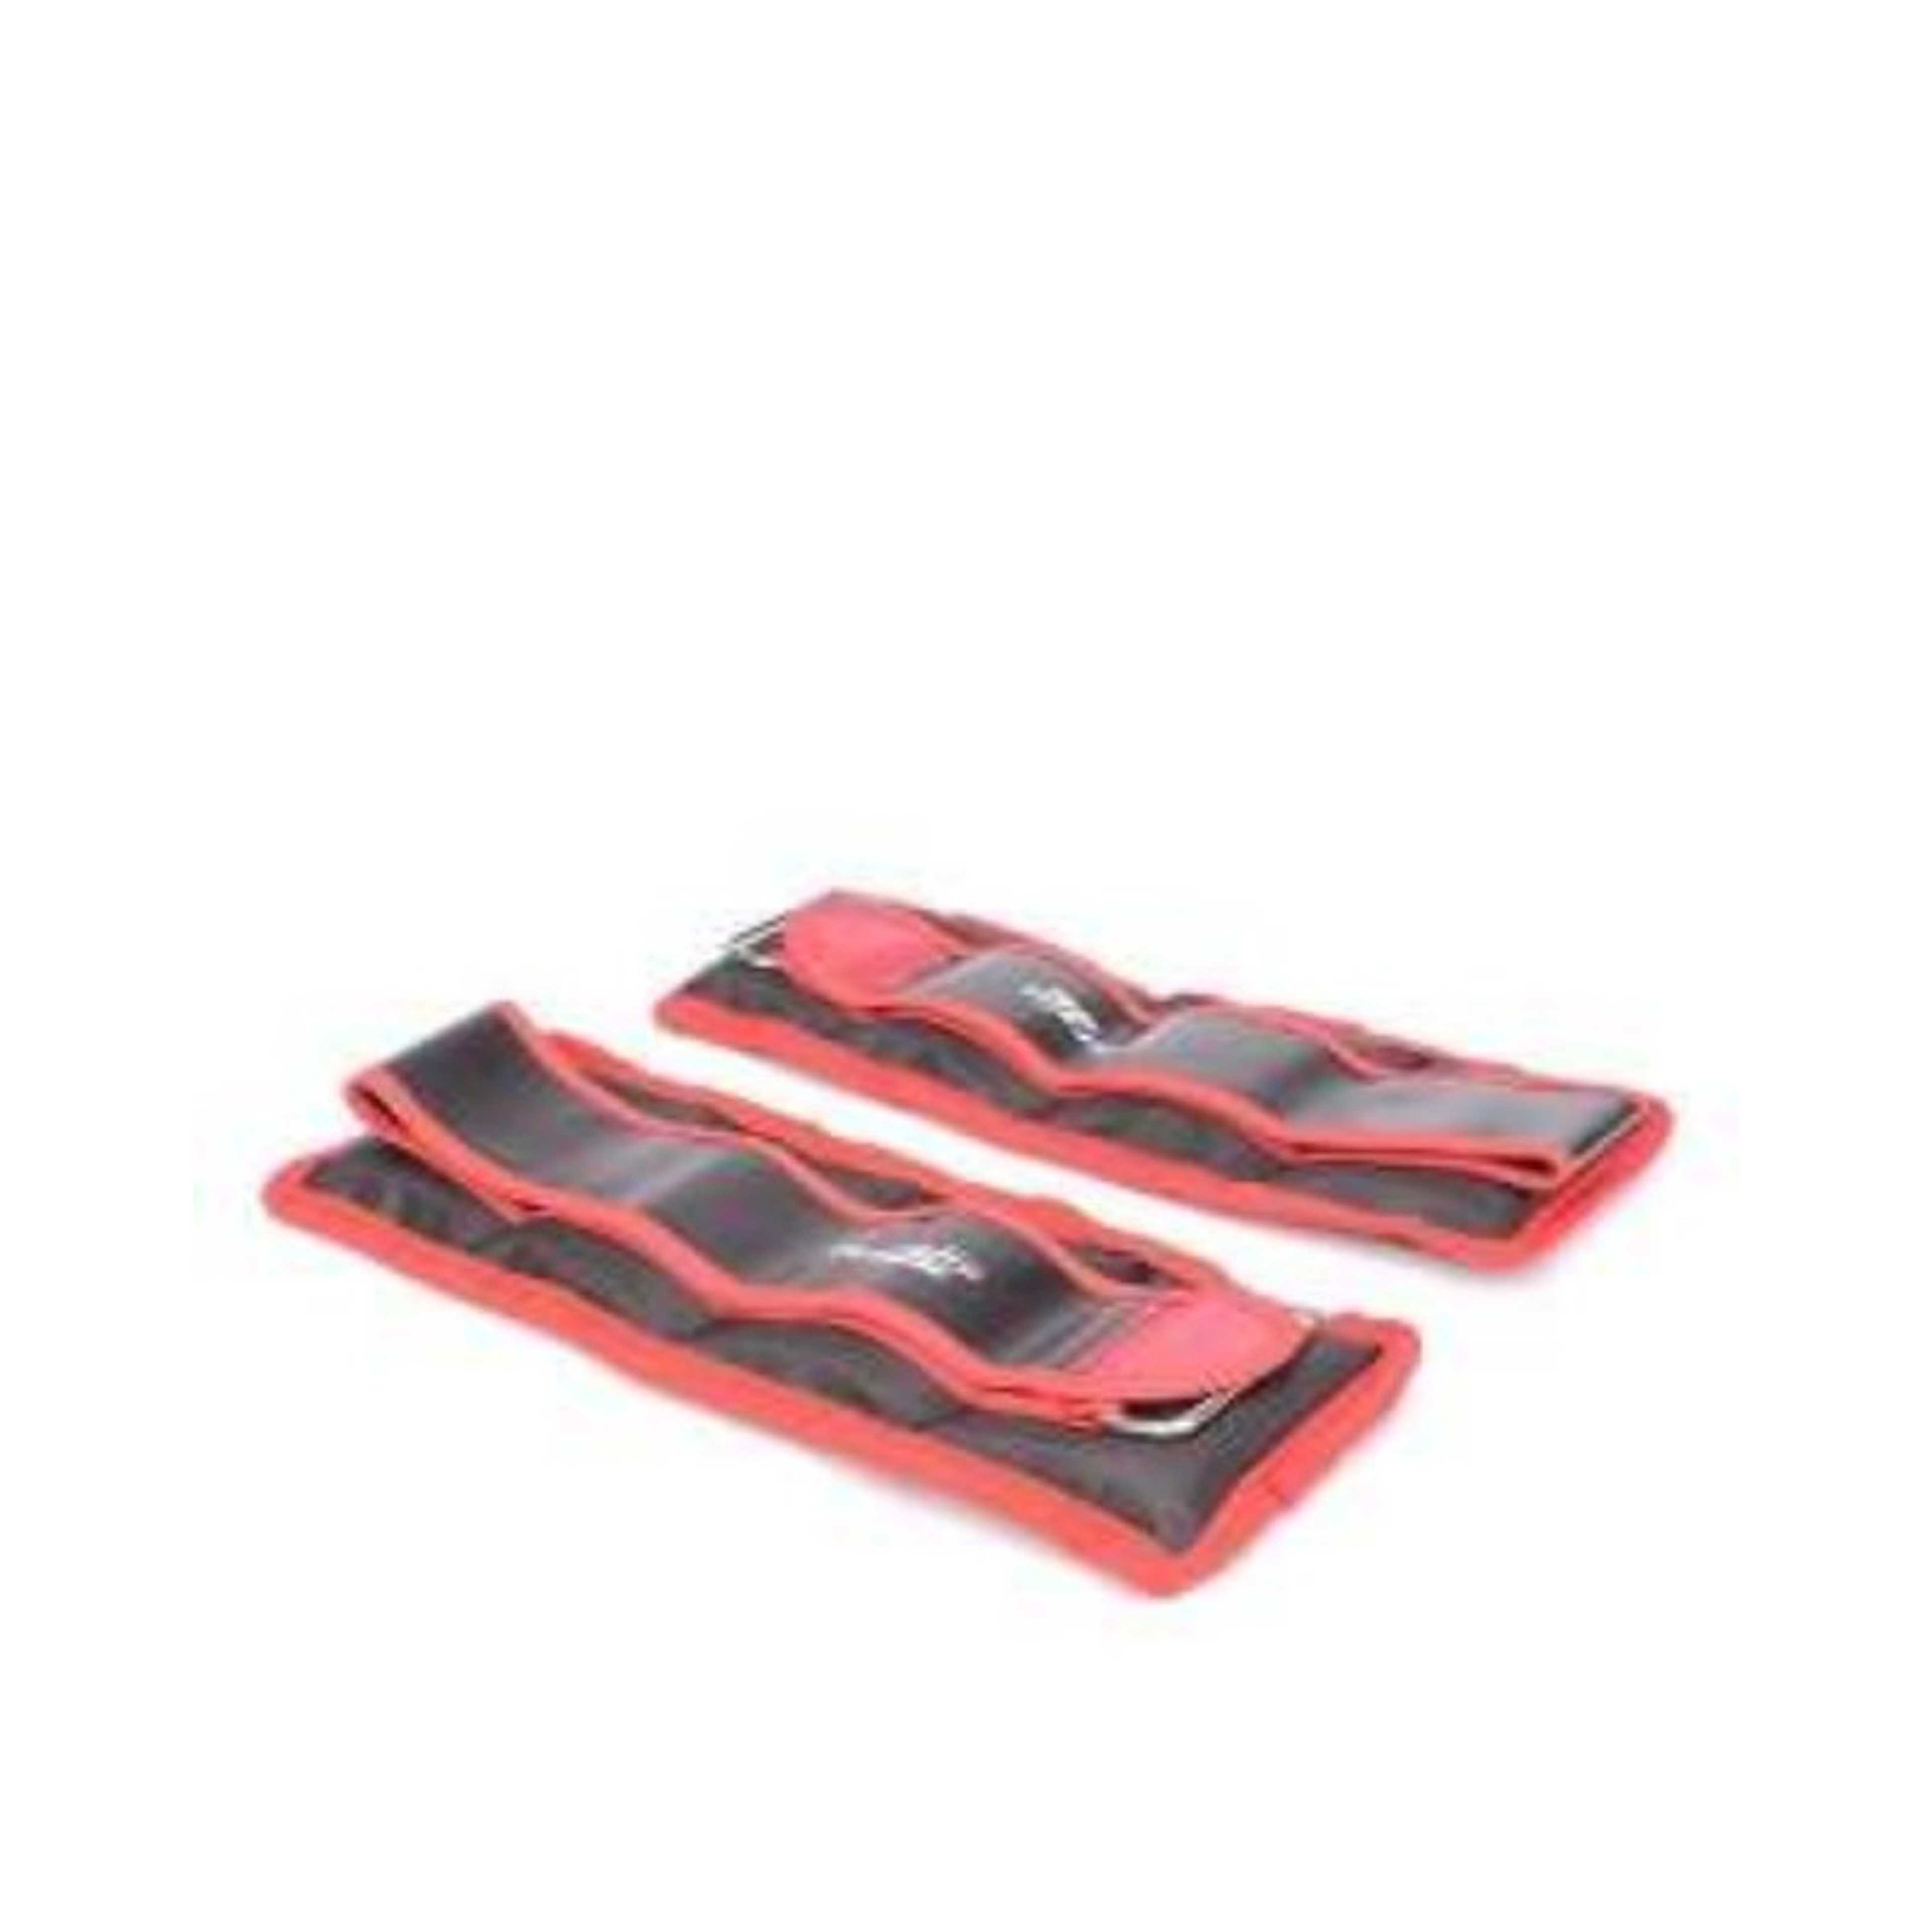 Ankle Weight For Foot And Hand Exercise 2 Kg - Red & Black